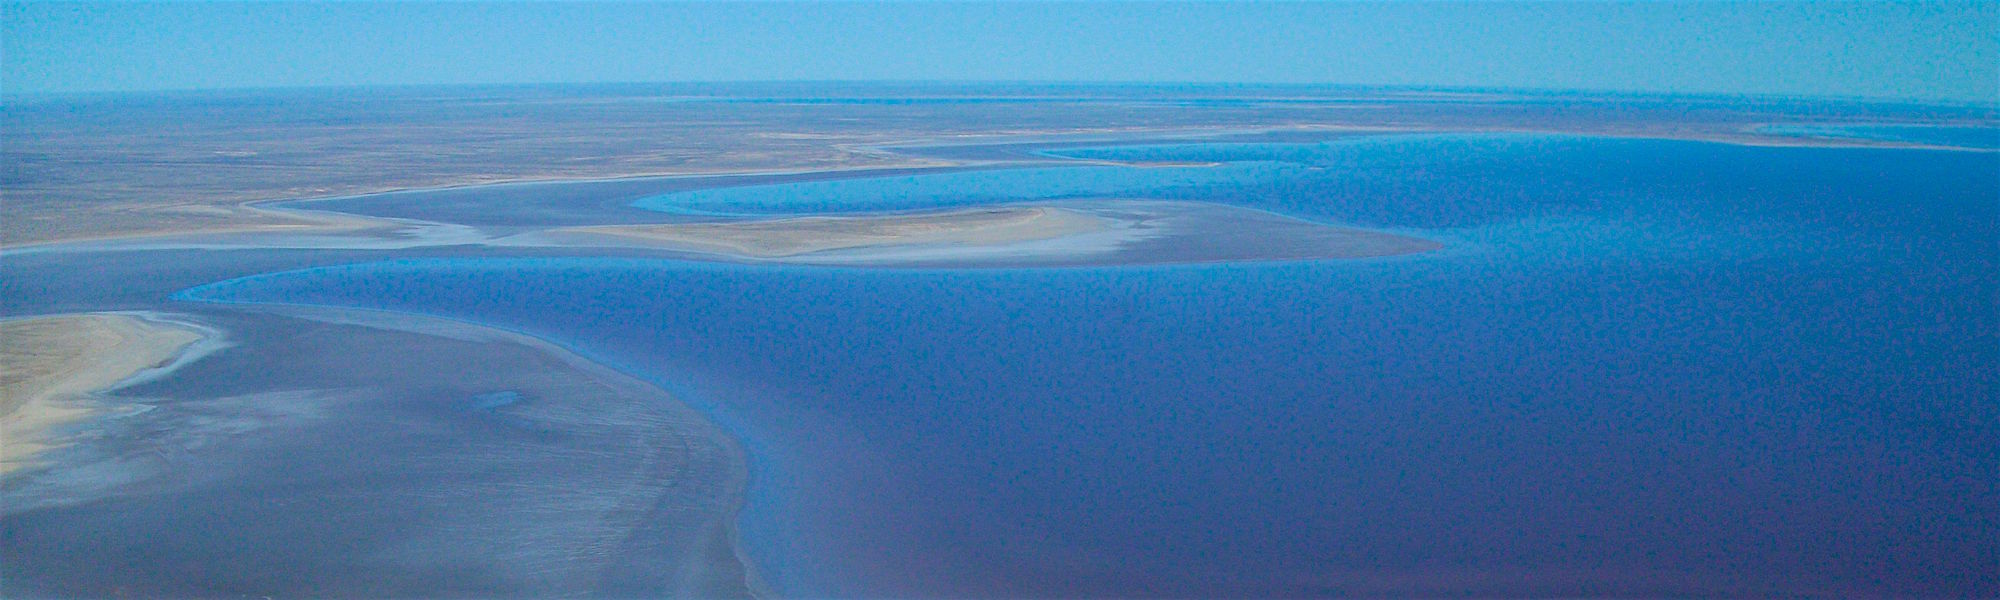 lake eyre tours from sydney